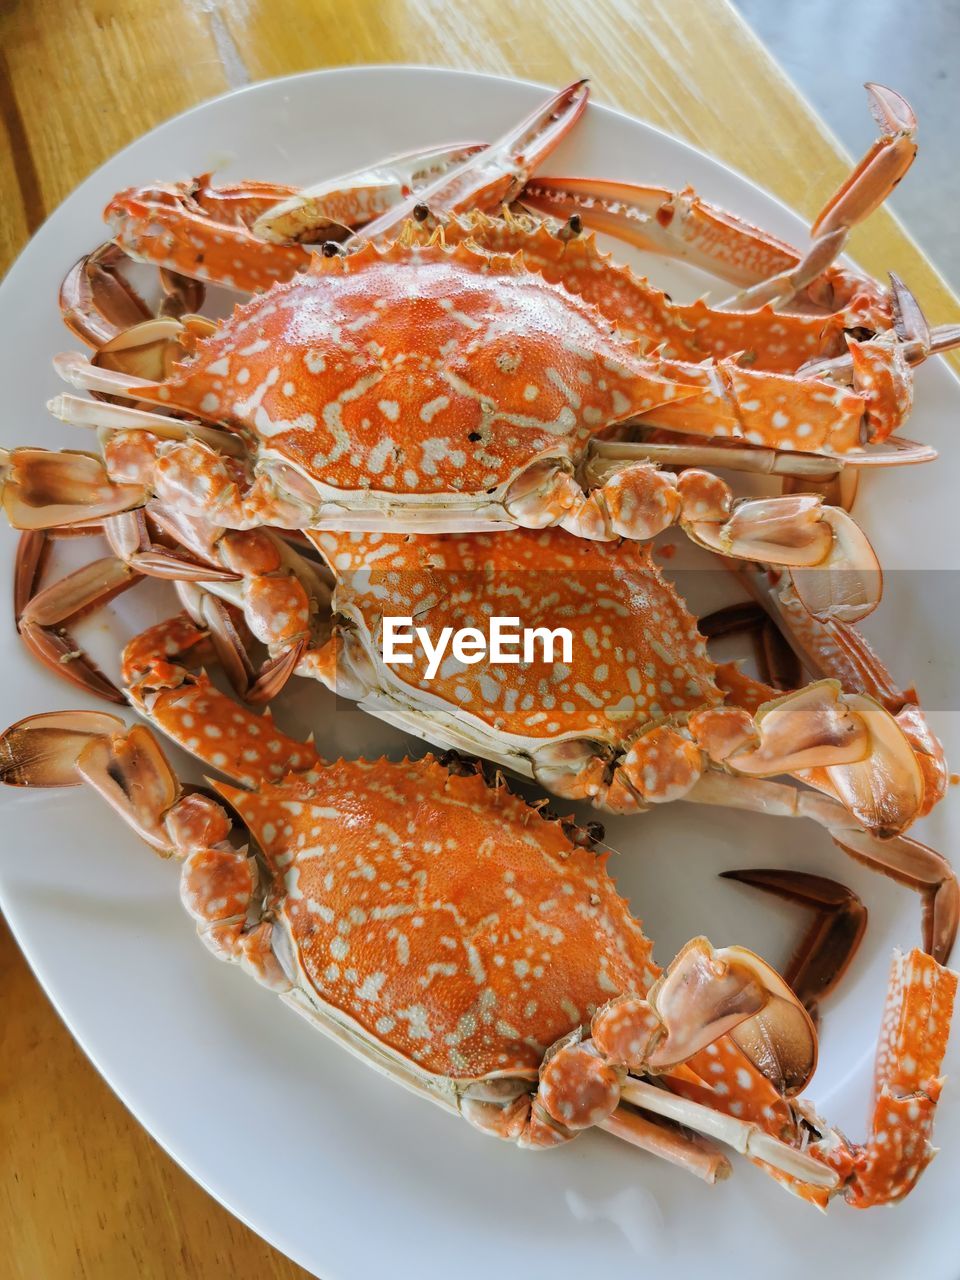 food, food and drink, dungeness crab, seafood, animal, crustacean, freshness, healthy eating, crab, meal, no people, wellbeing, fish, gourmet, plate, dinner, high angle view, indoors, animal themes, table, animal shell, close-up, meat, cooked, shell, prawn, shrimp